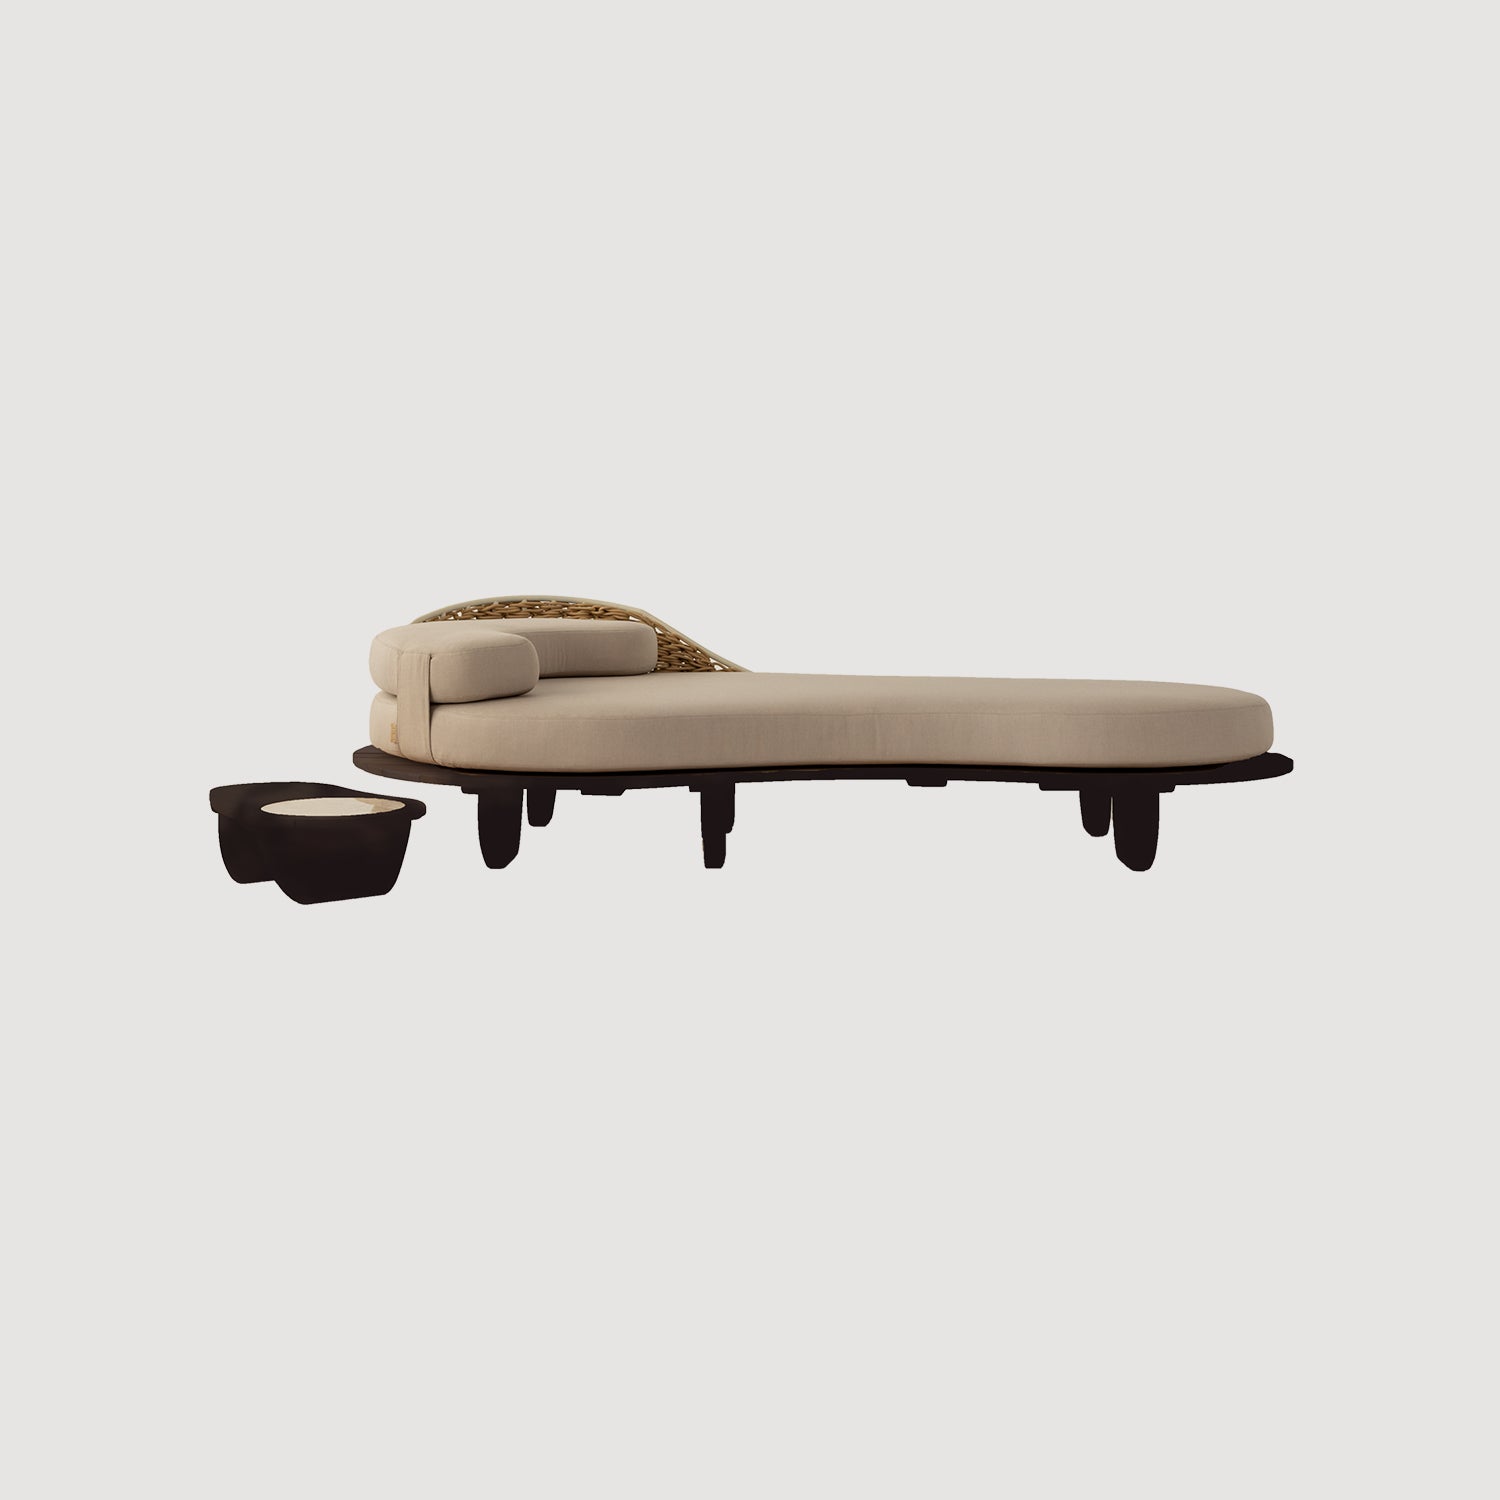 The Sayari Indoor / Outdoor Daybed Chaise et Table Collection by Studio Lloyd